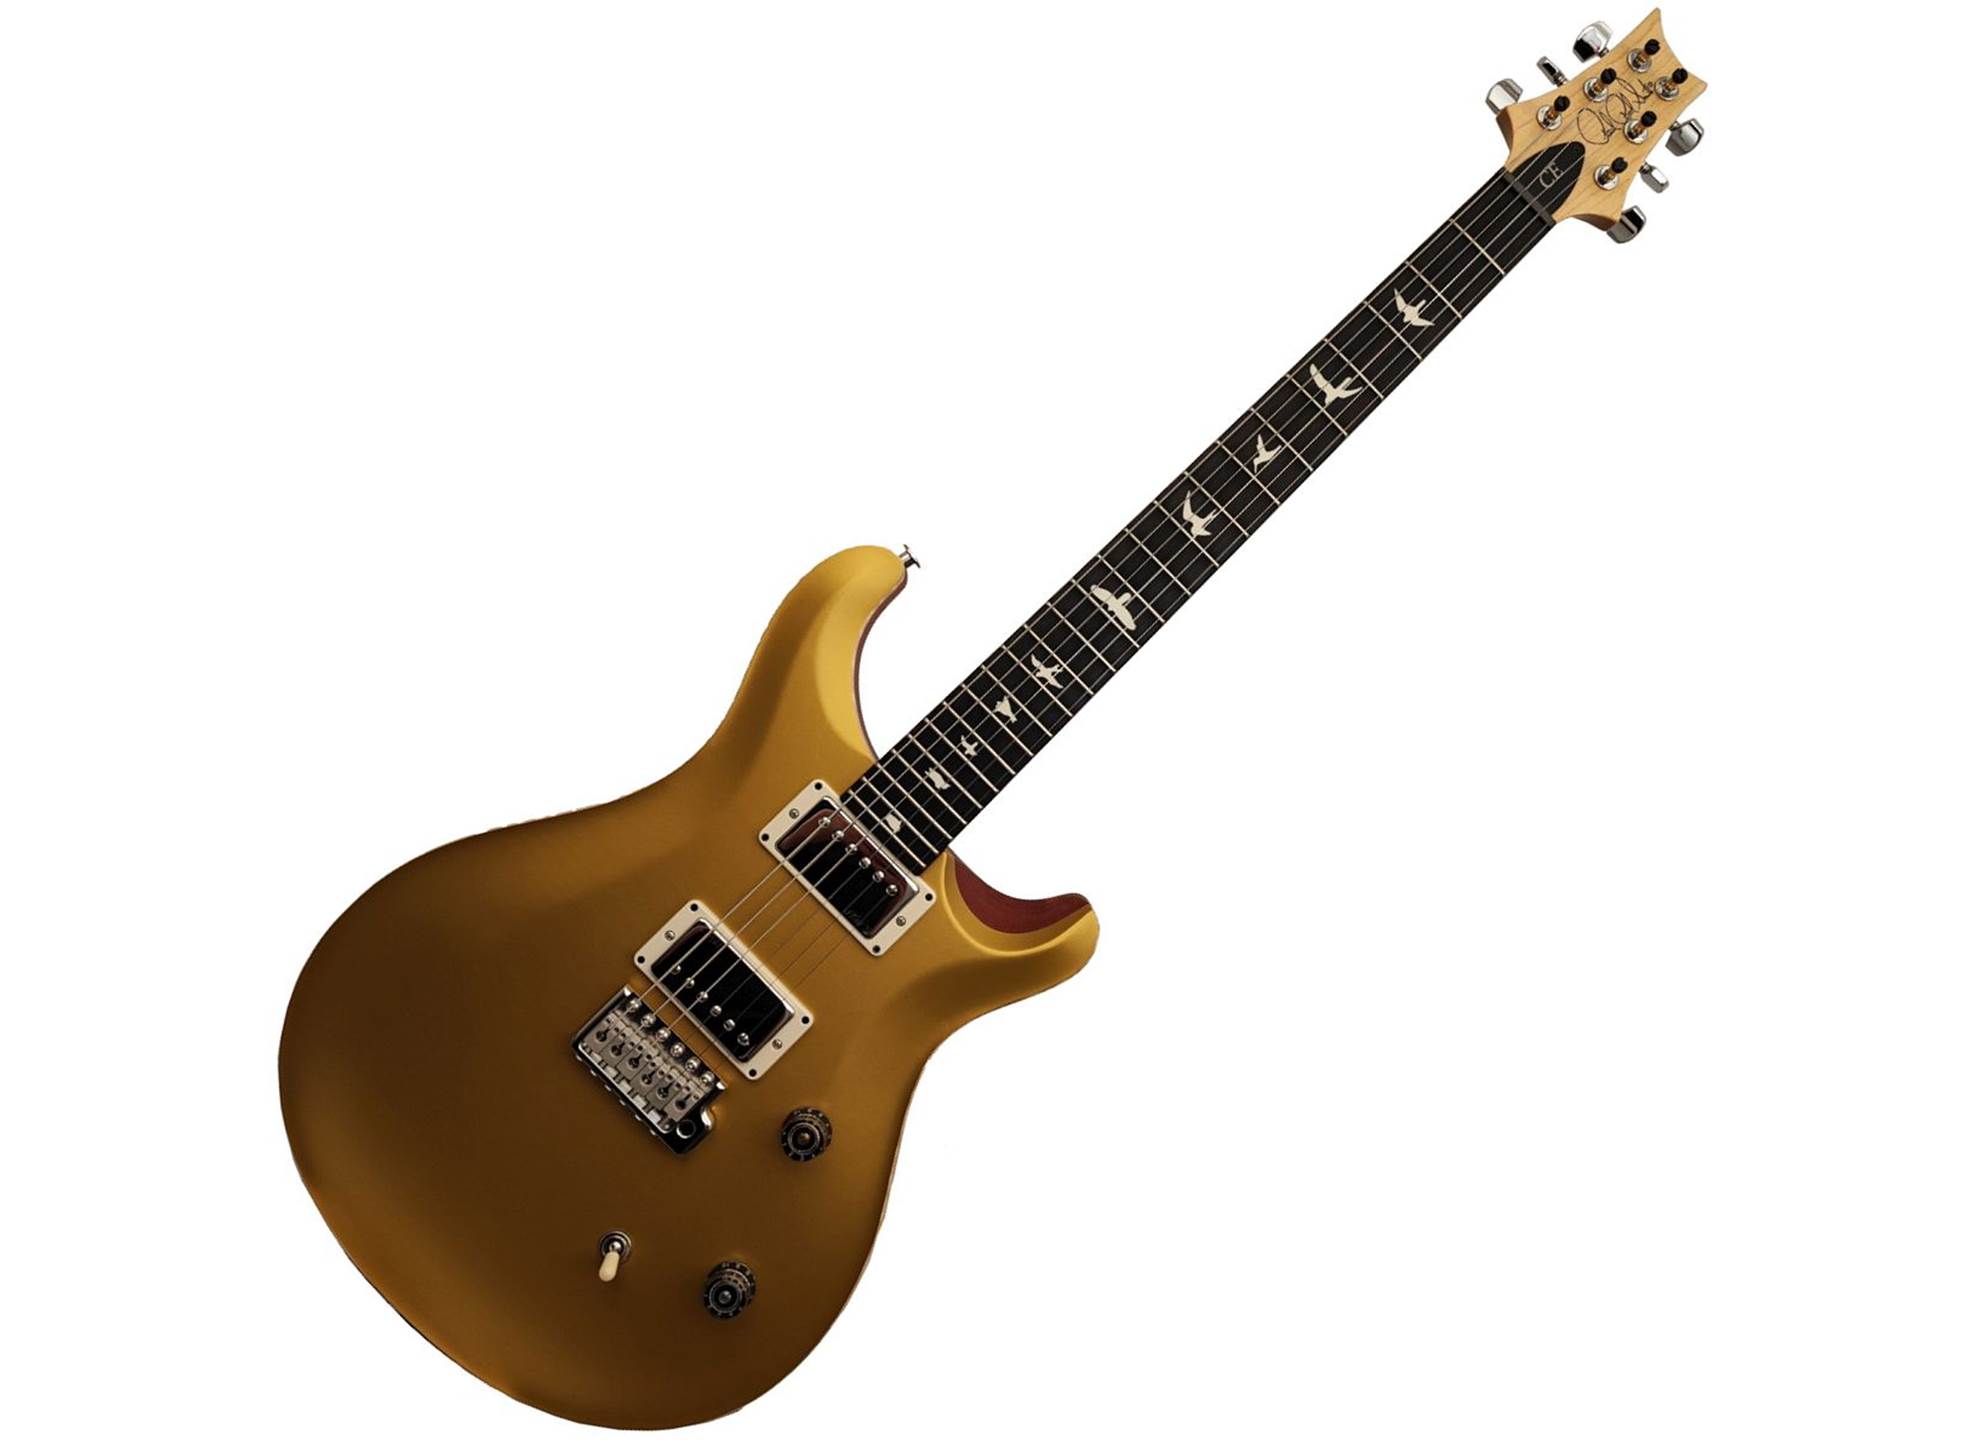 CE24 Satin Gold Top Limited Edition